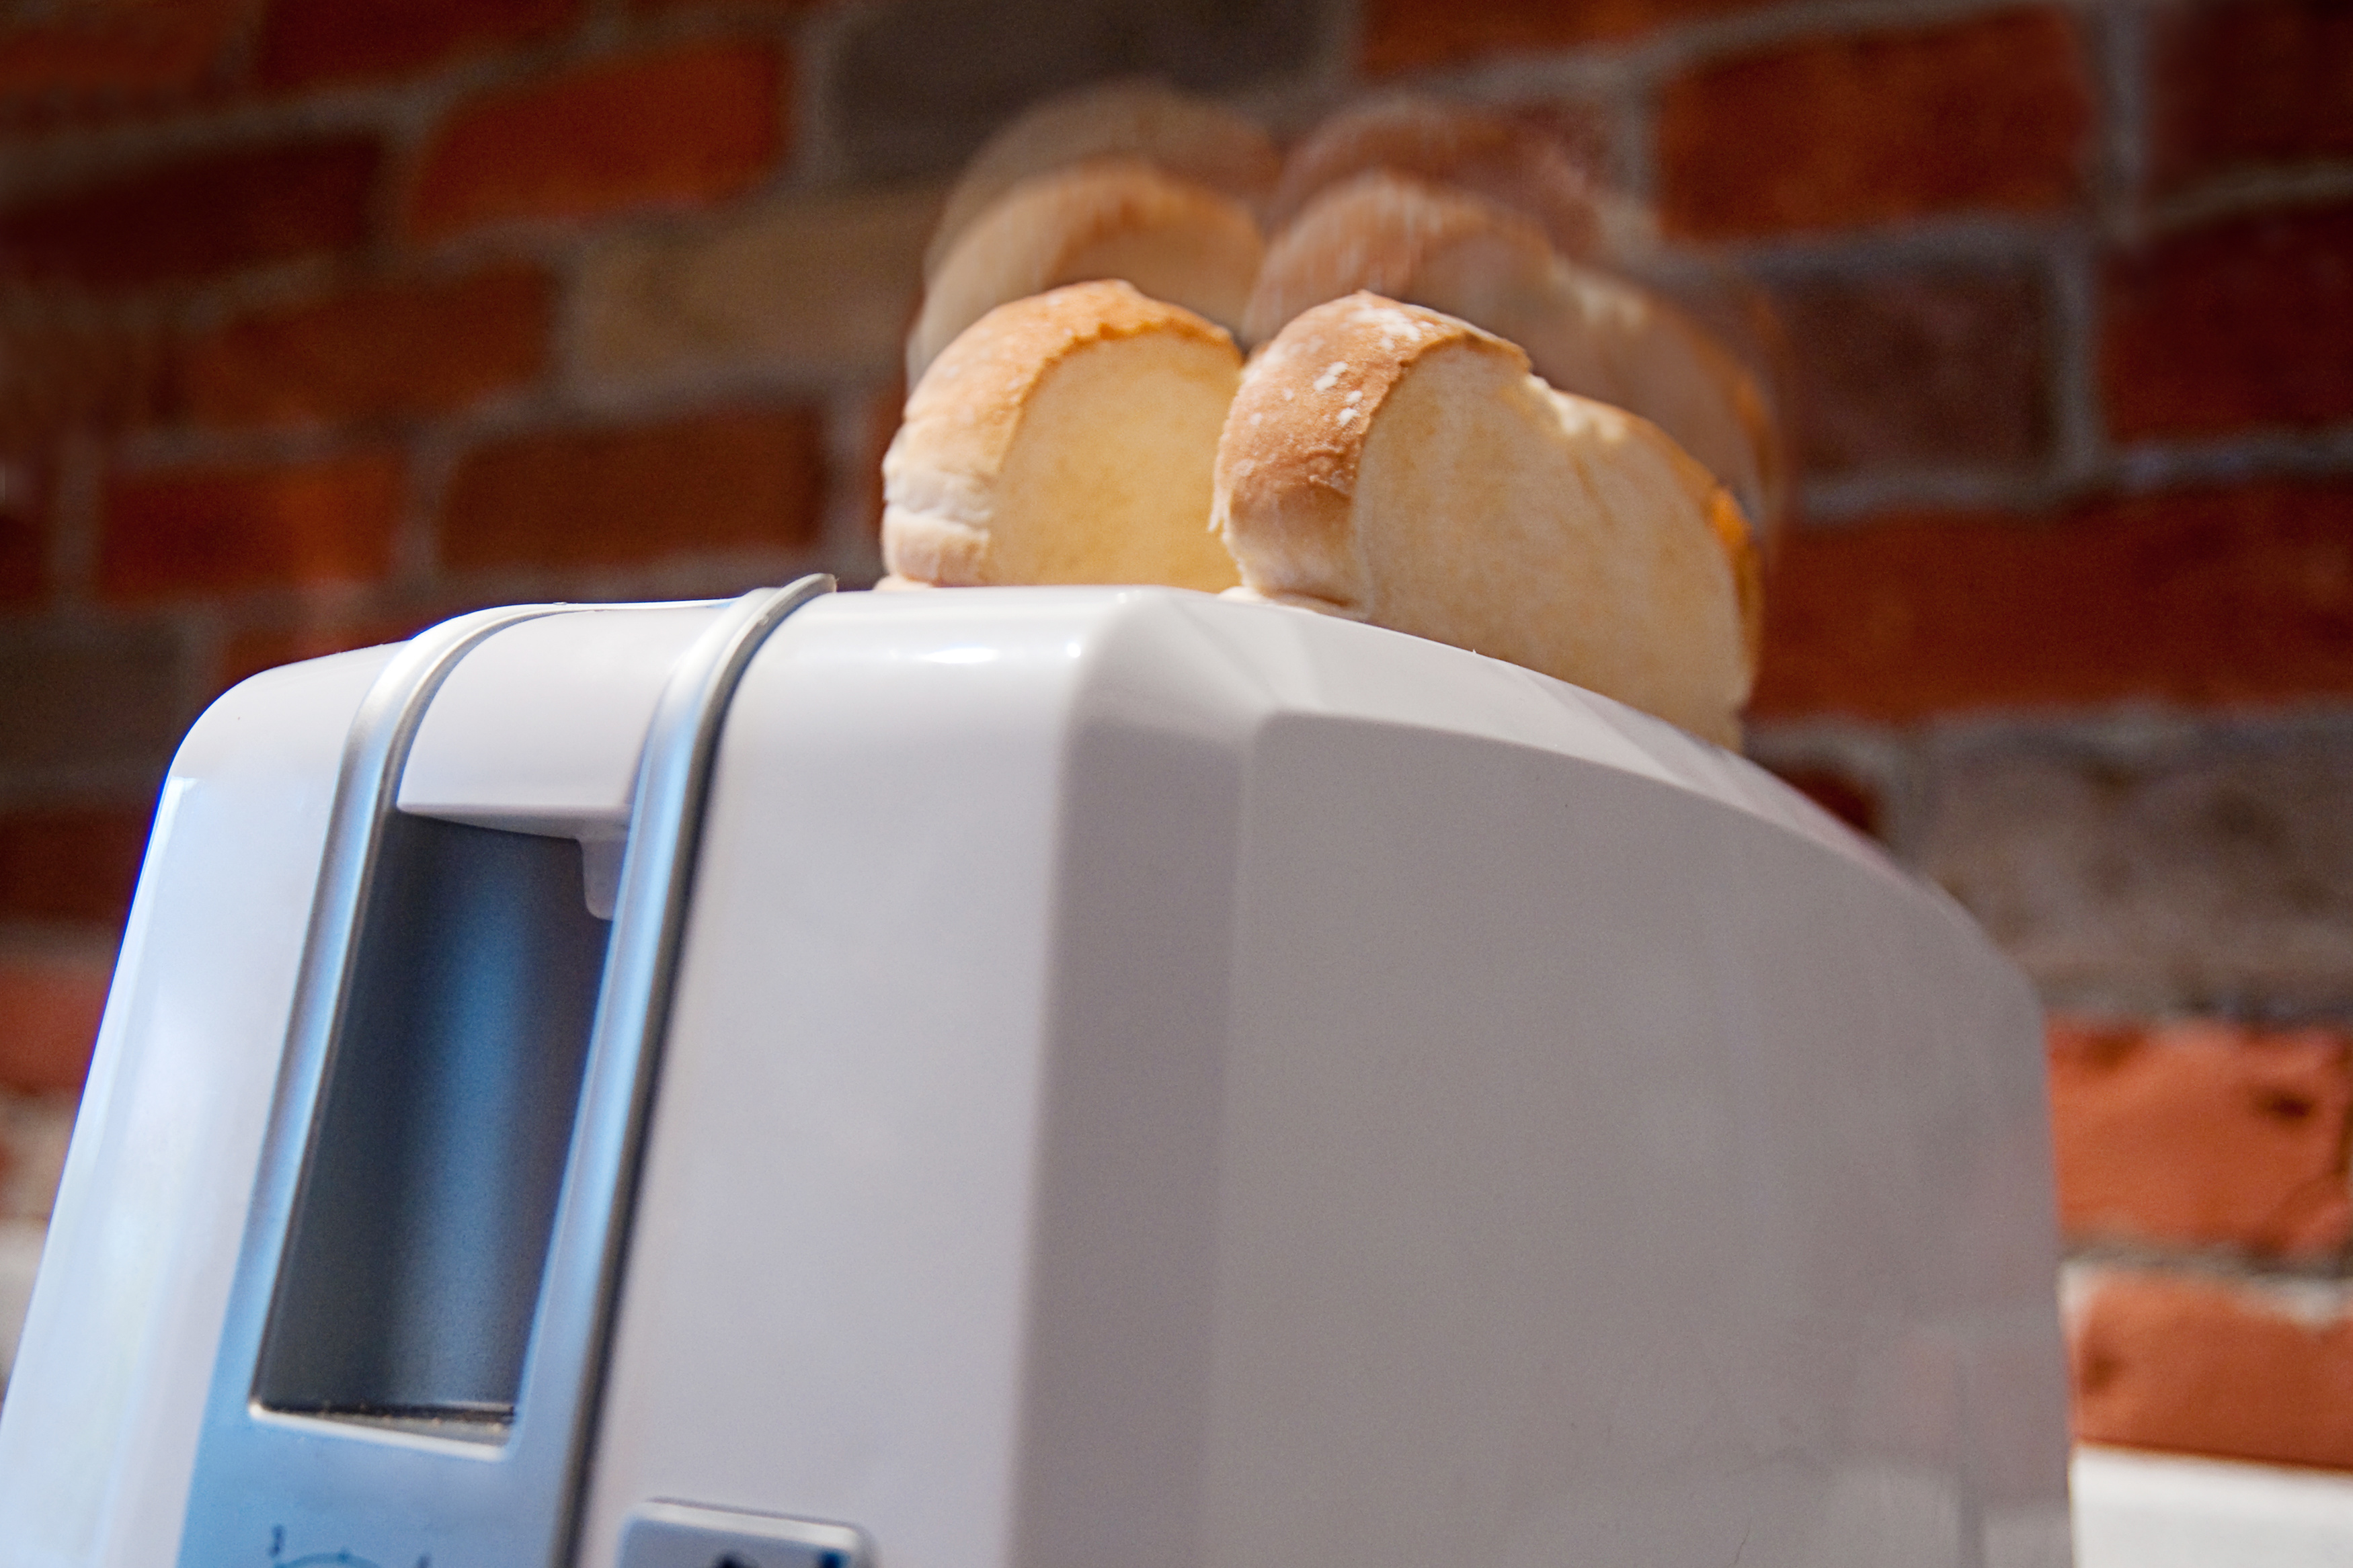 Pop-up Toasters